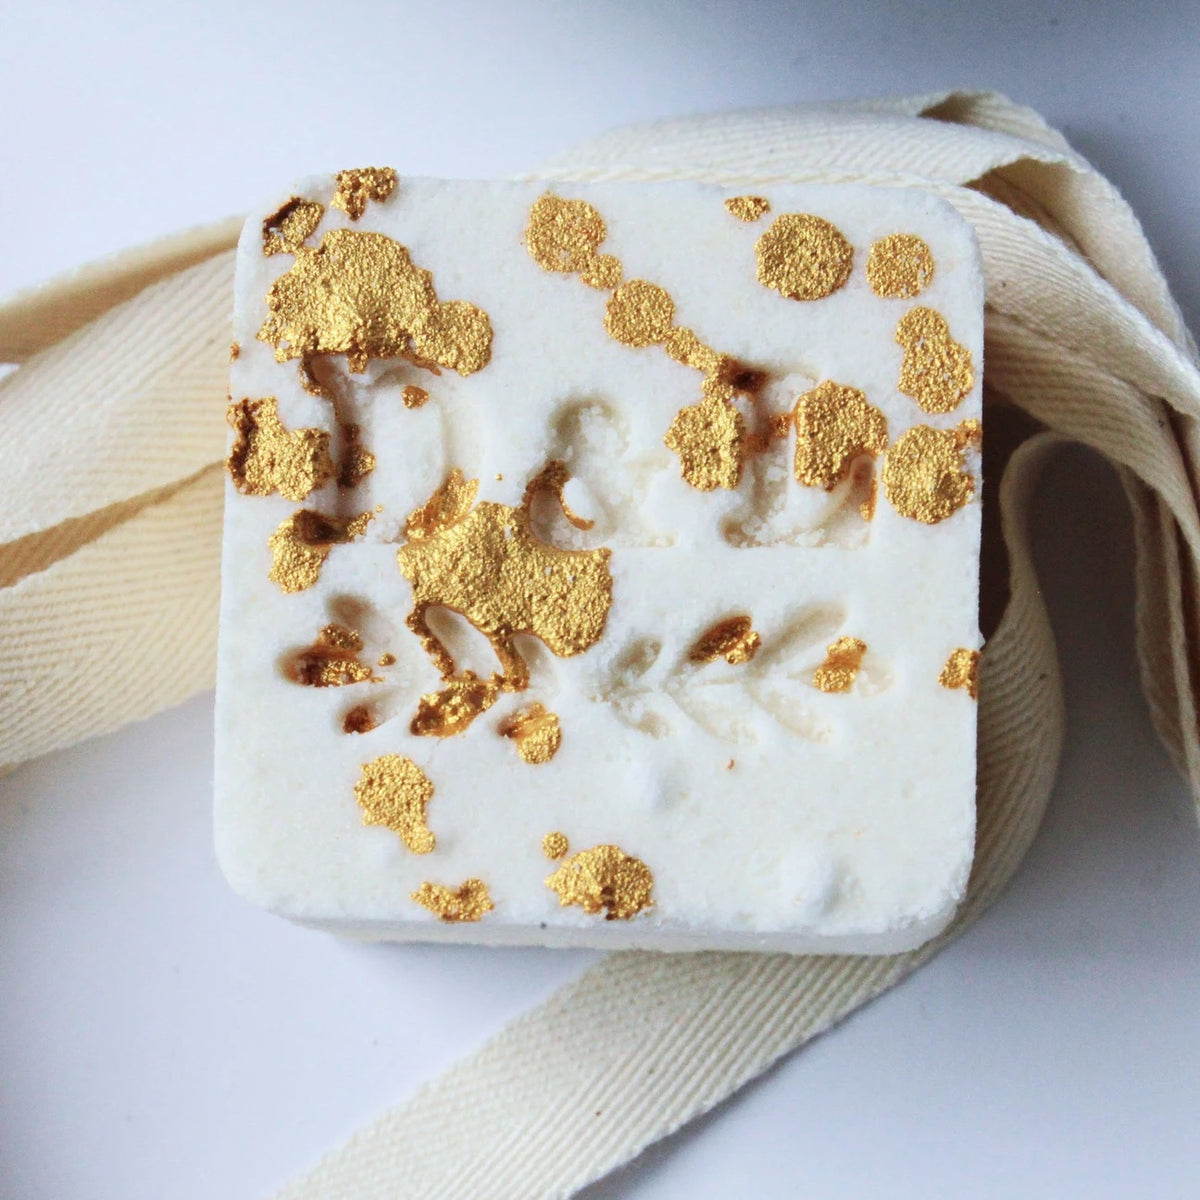 A square, handmade Dot & Lil Sugar + Spice Sparkling Milk Bath Cube with an embossed floral design, featuring patches of gold leaf scattered across its surface. It rests on a white background with a ribbon beside it.